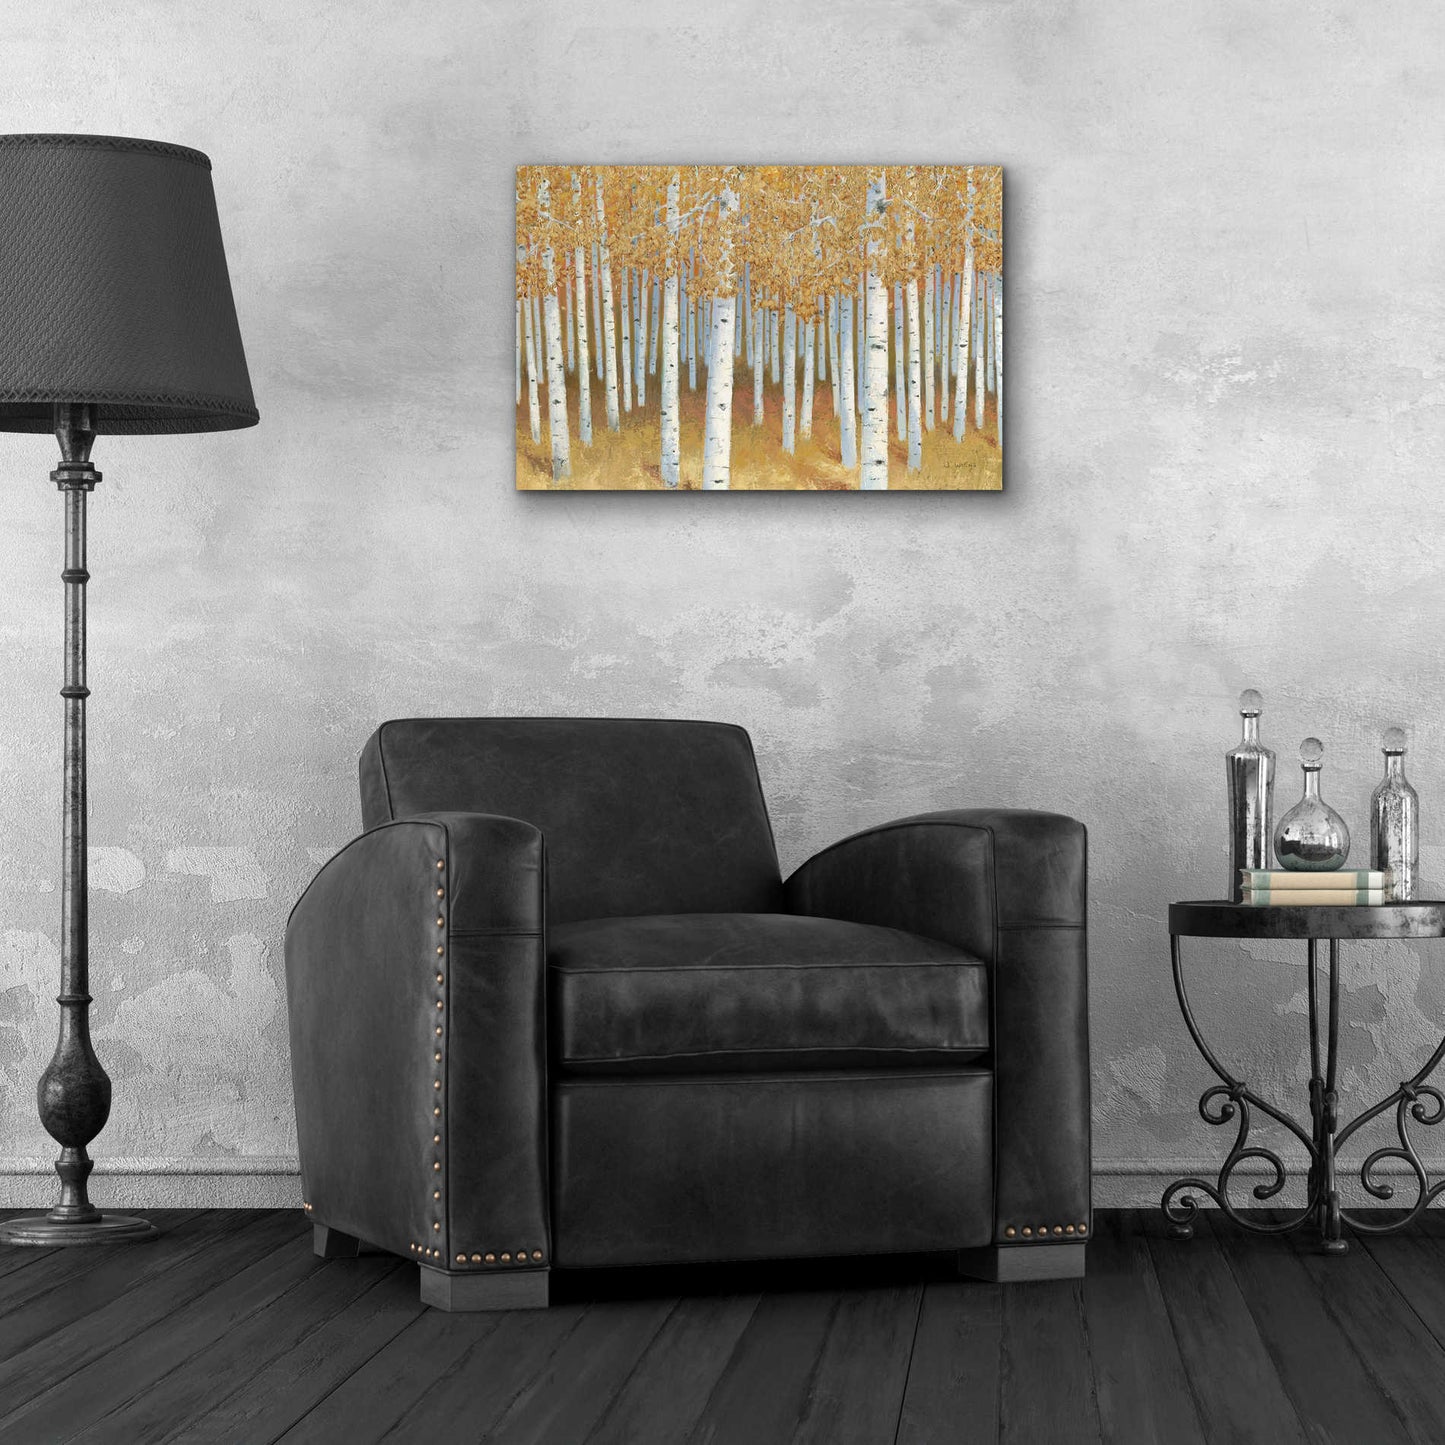 Epic Art 'Forest of Gold' by James Wiens, Acrylic Glass Wall Art,24x16